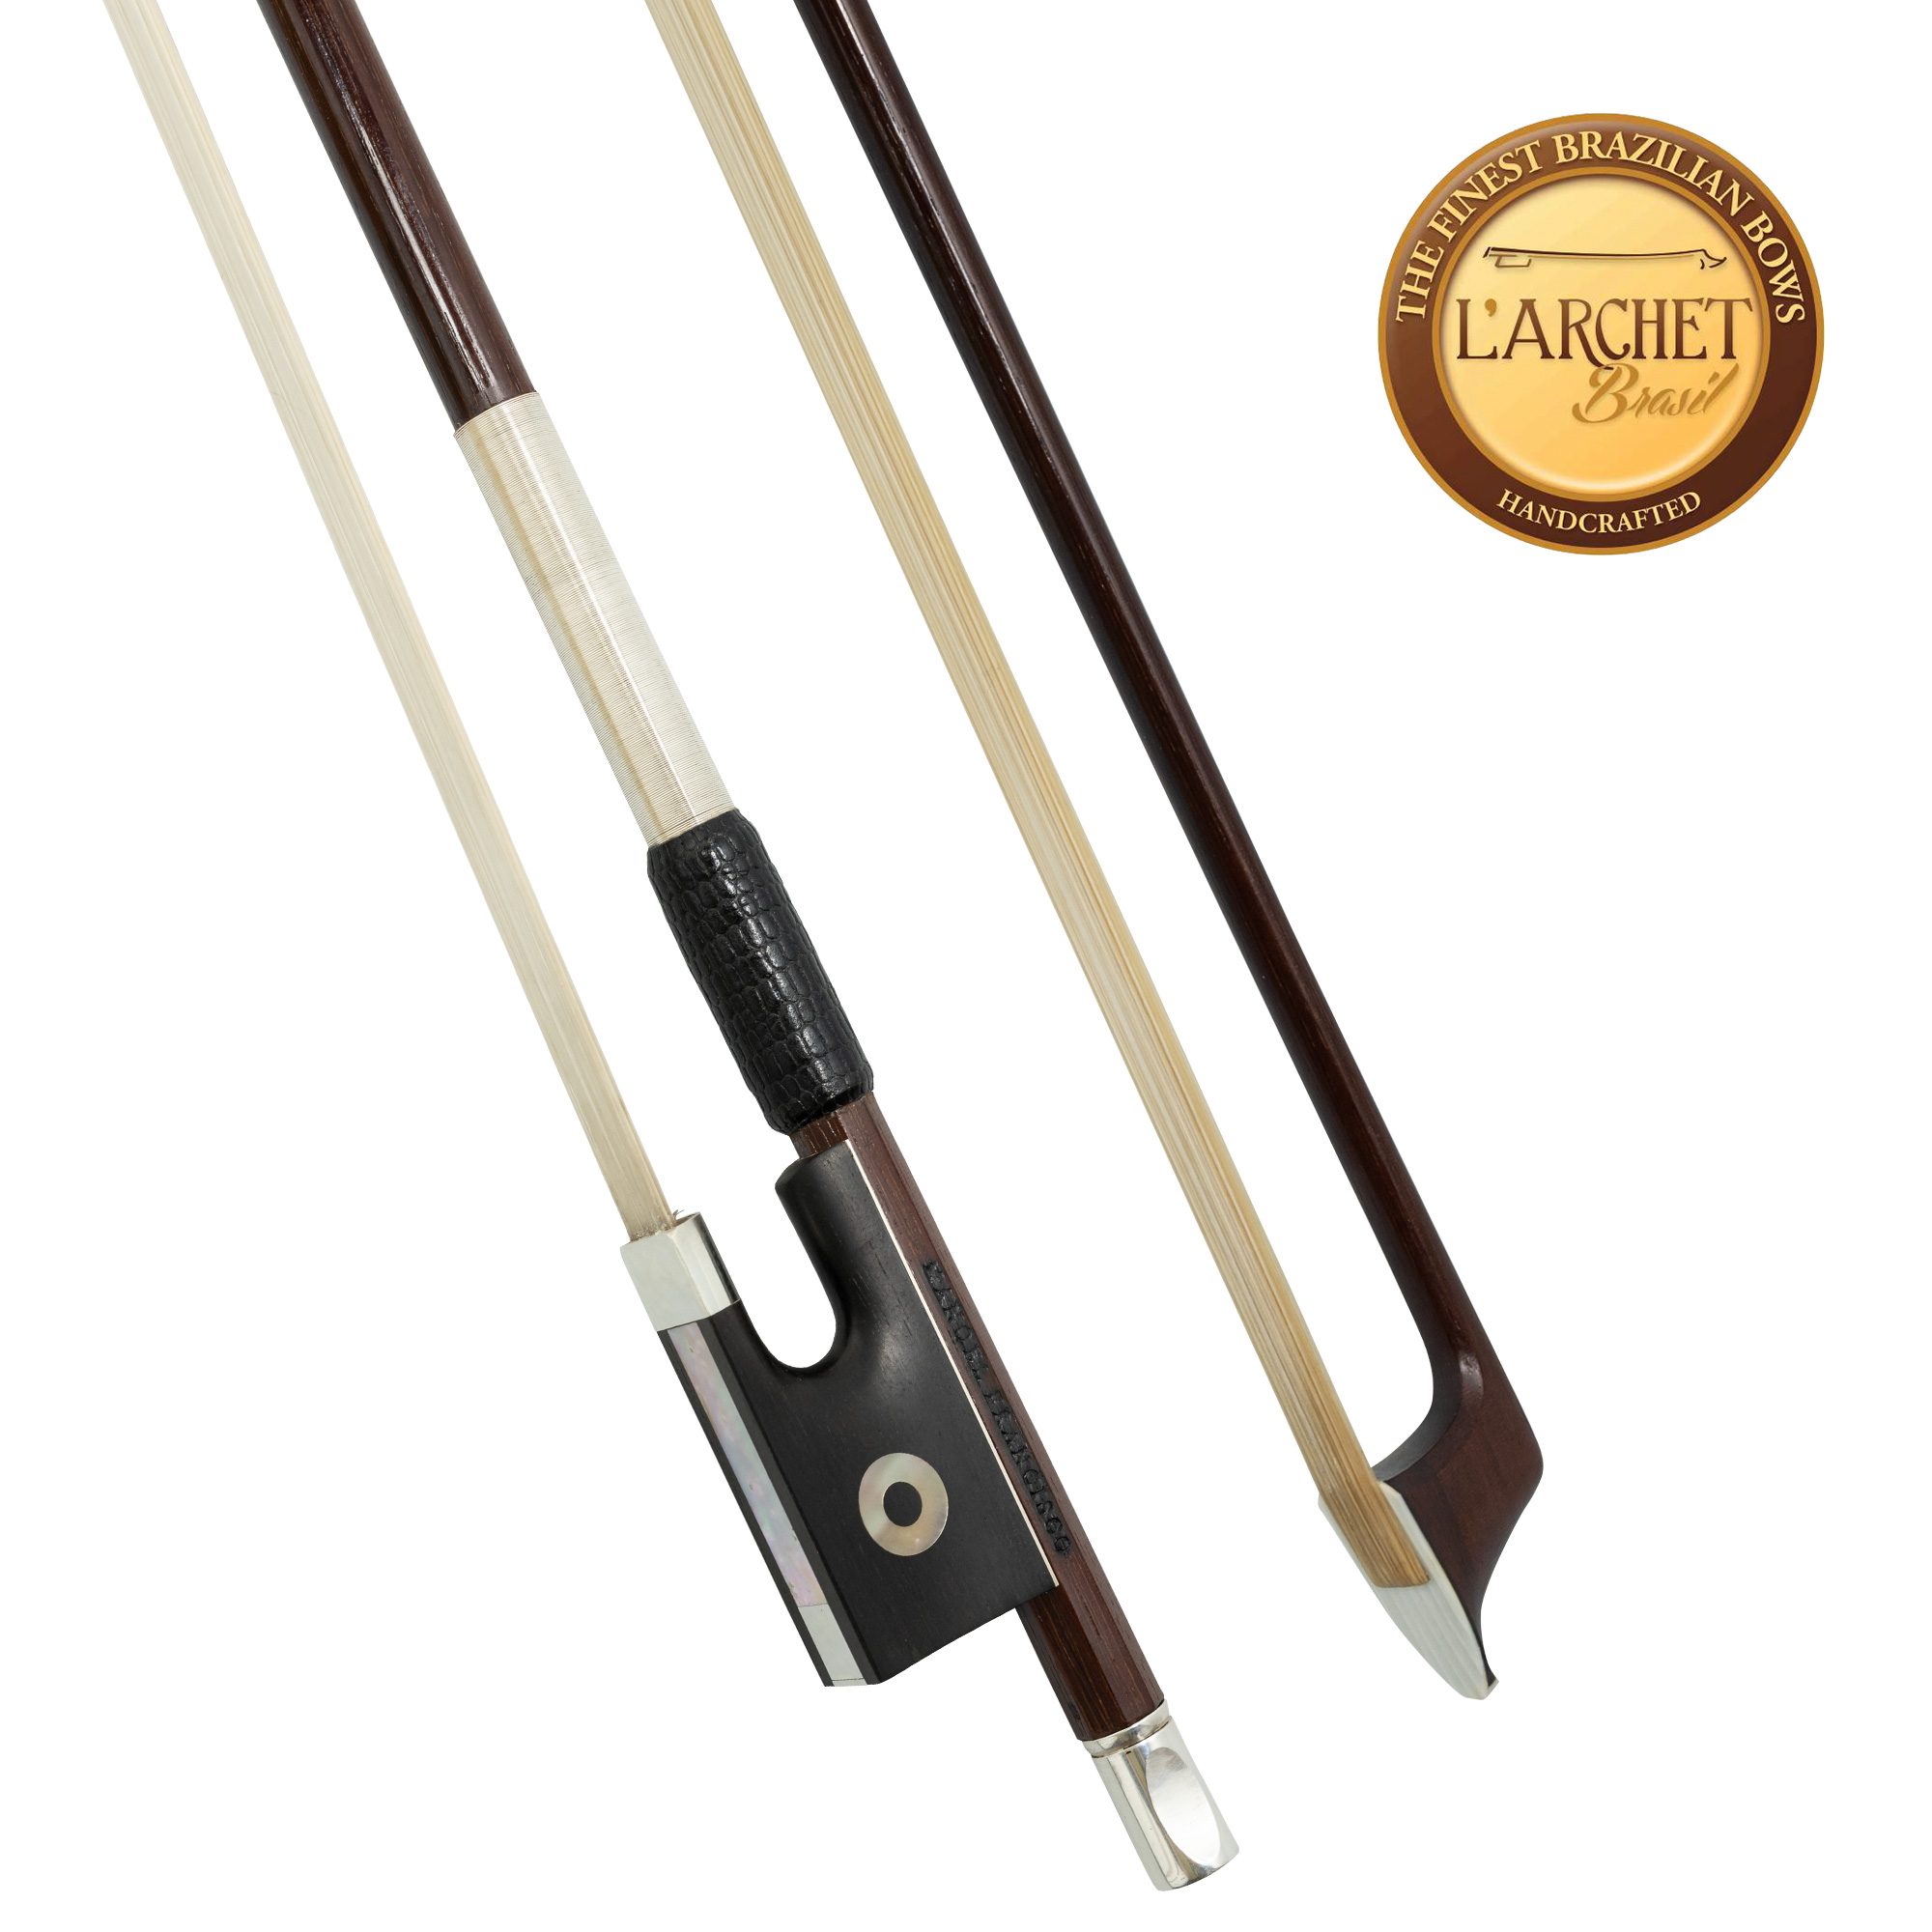 L'archet Brasil Silver Full-Mount Ipe Elite Special Edition Violin Bow in action